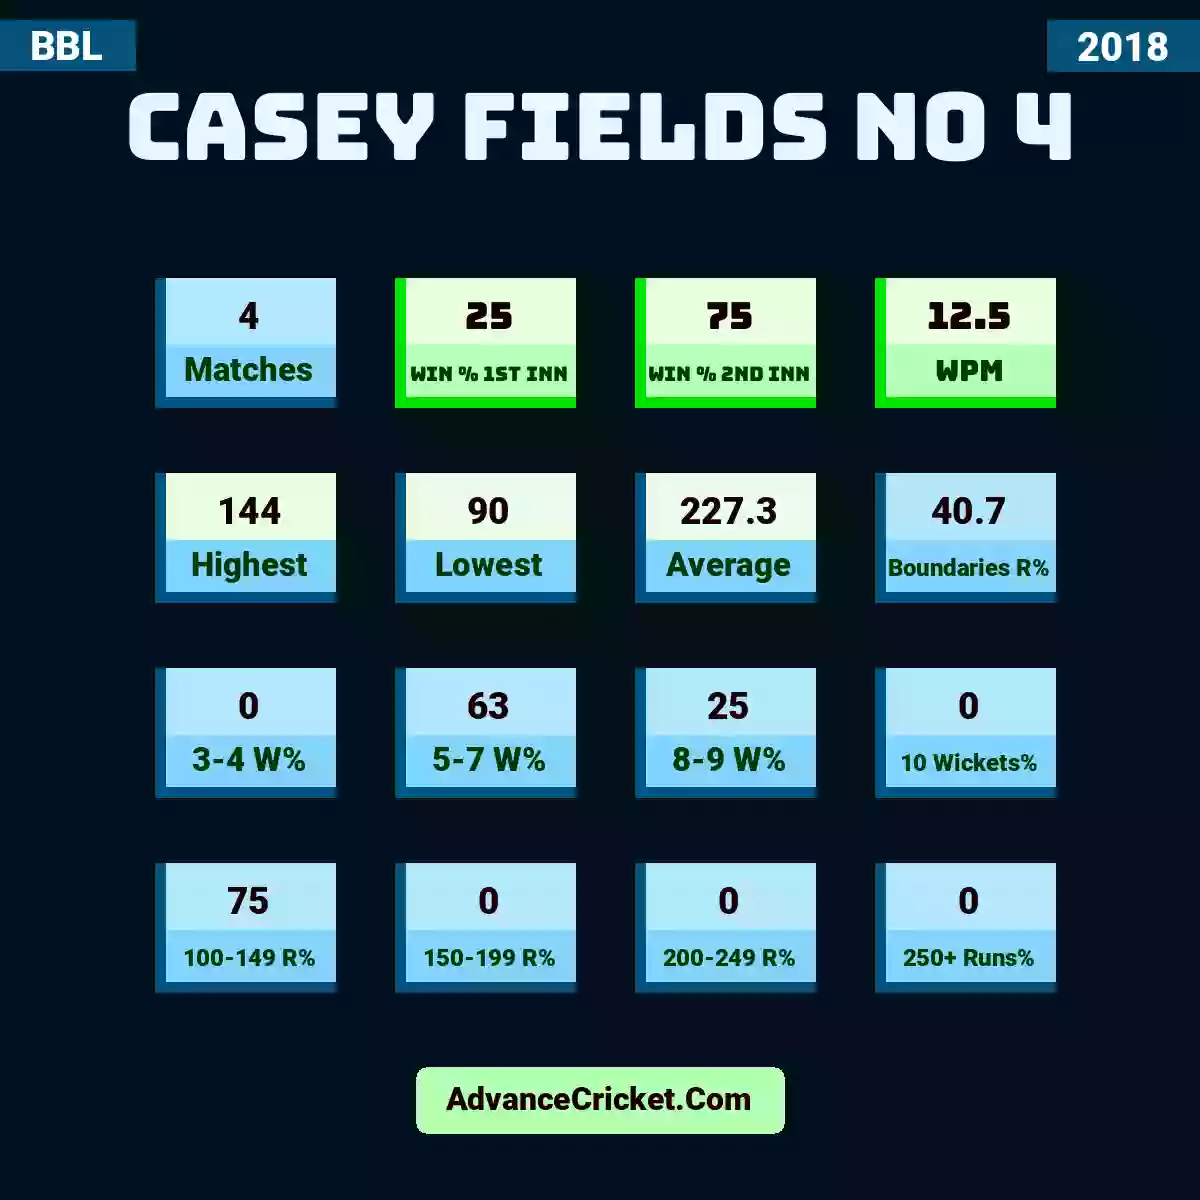 Image showing Casey Fields No 4 with Matches: 4, Win % 1st Inn: 25, Win % 2nd Inn: 75, WPM: 12.5, Highest: 144, Lowest: 90, Average: 227.3, Boundaries R%: 40.7, 3-4 W%: 0, 5-7 W%: 63, 8-9 W%: 25, 10 Wickets%: 0, 100-149 R%: 75, 150-199 R%: 0, 200-249 R%: 0, 250+ Runs%: 0.